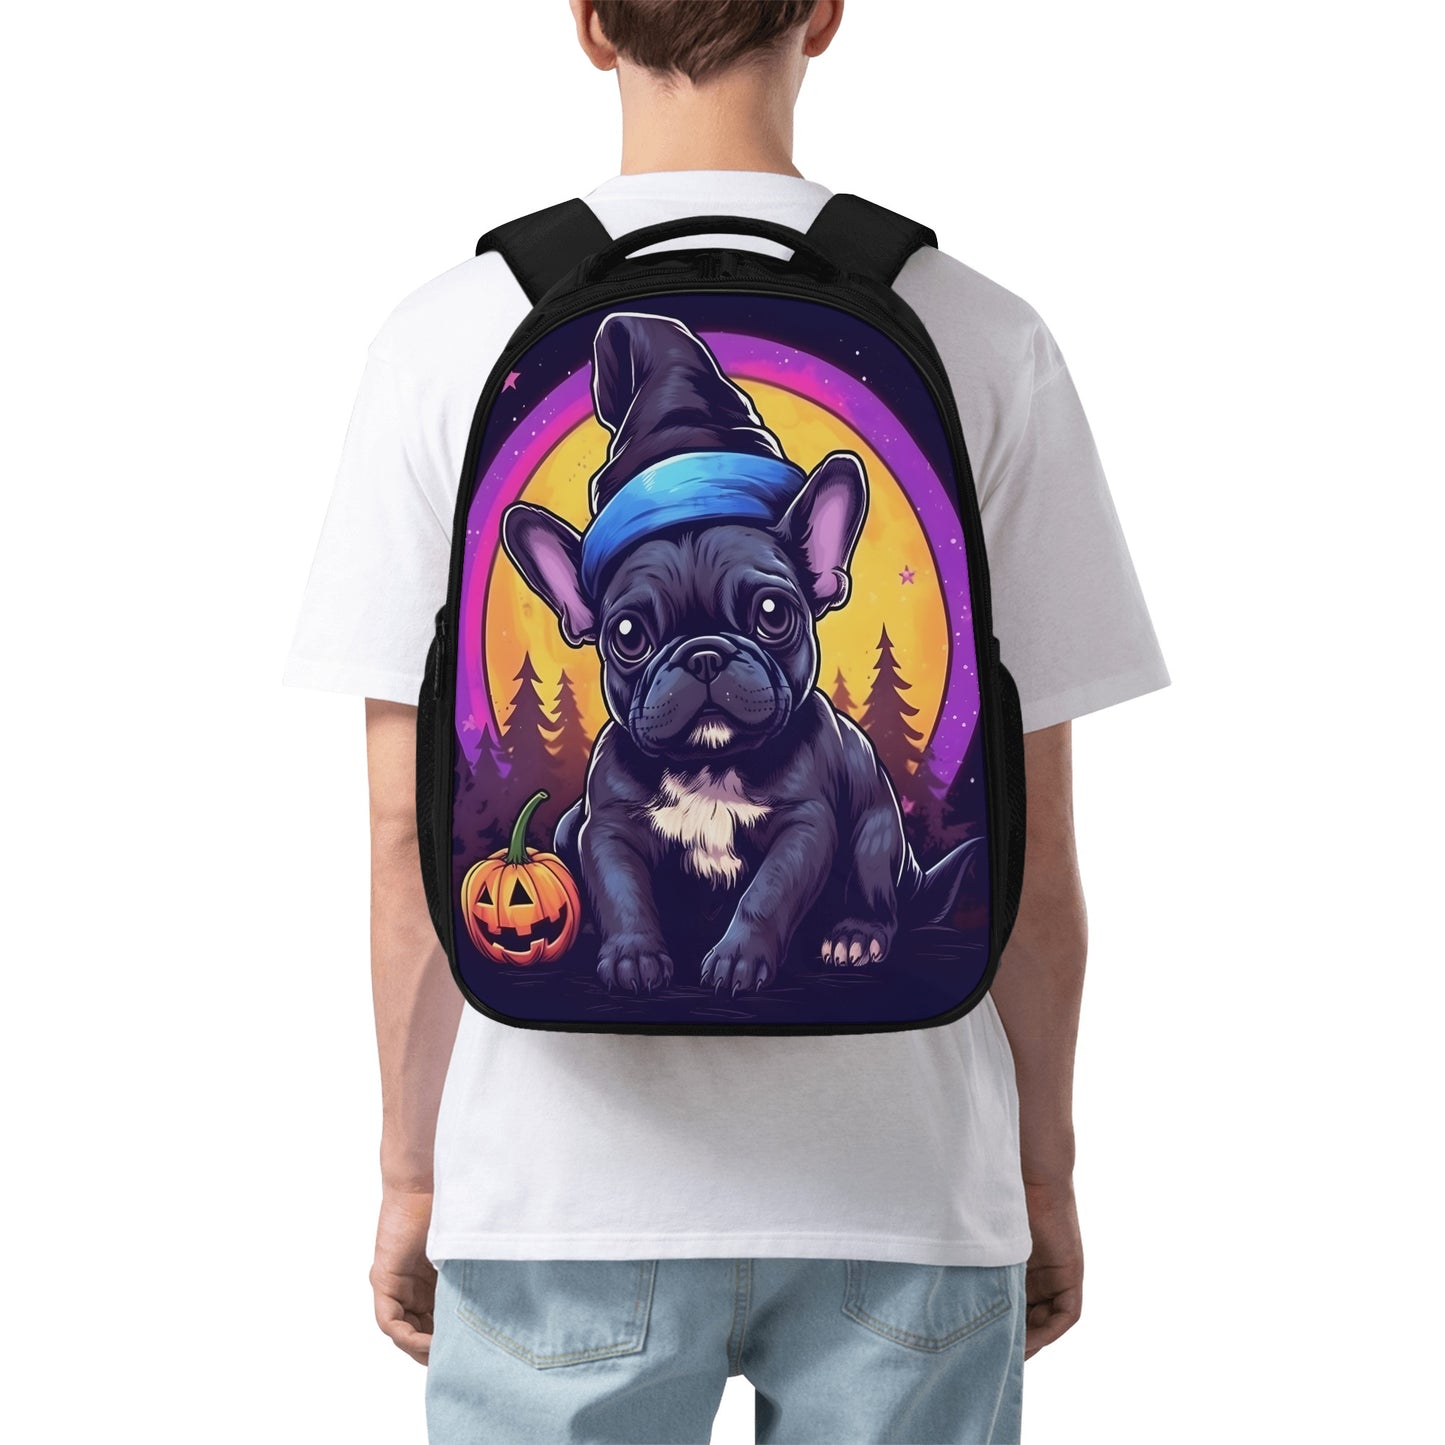 The magician - 16 Inch Dual Compartmen Backpack